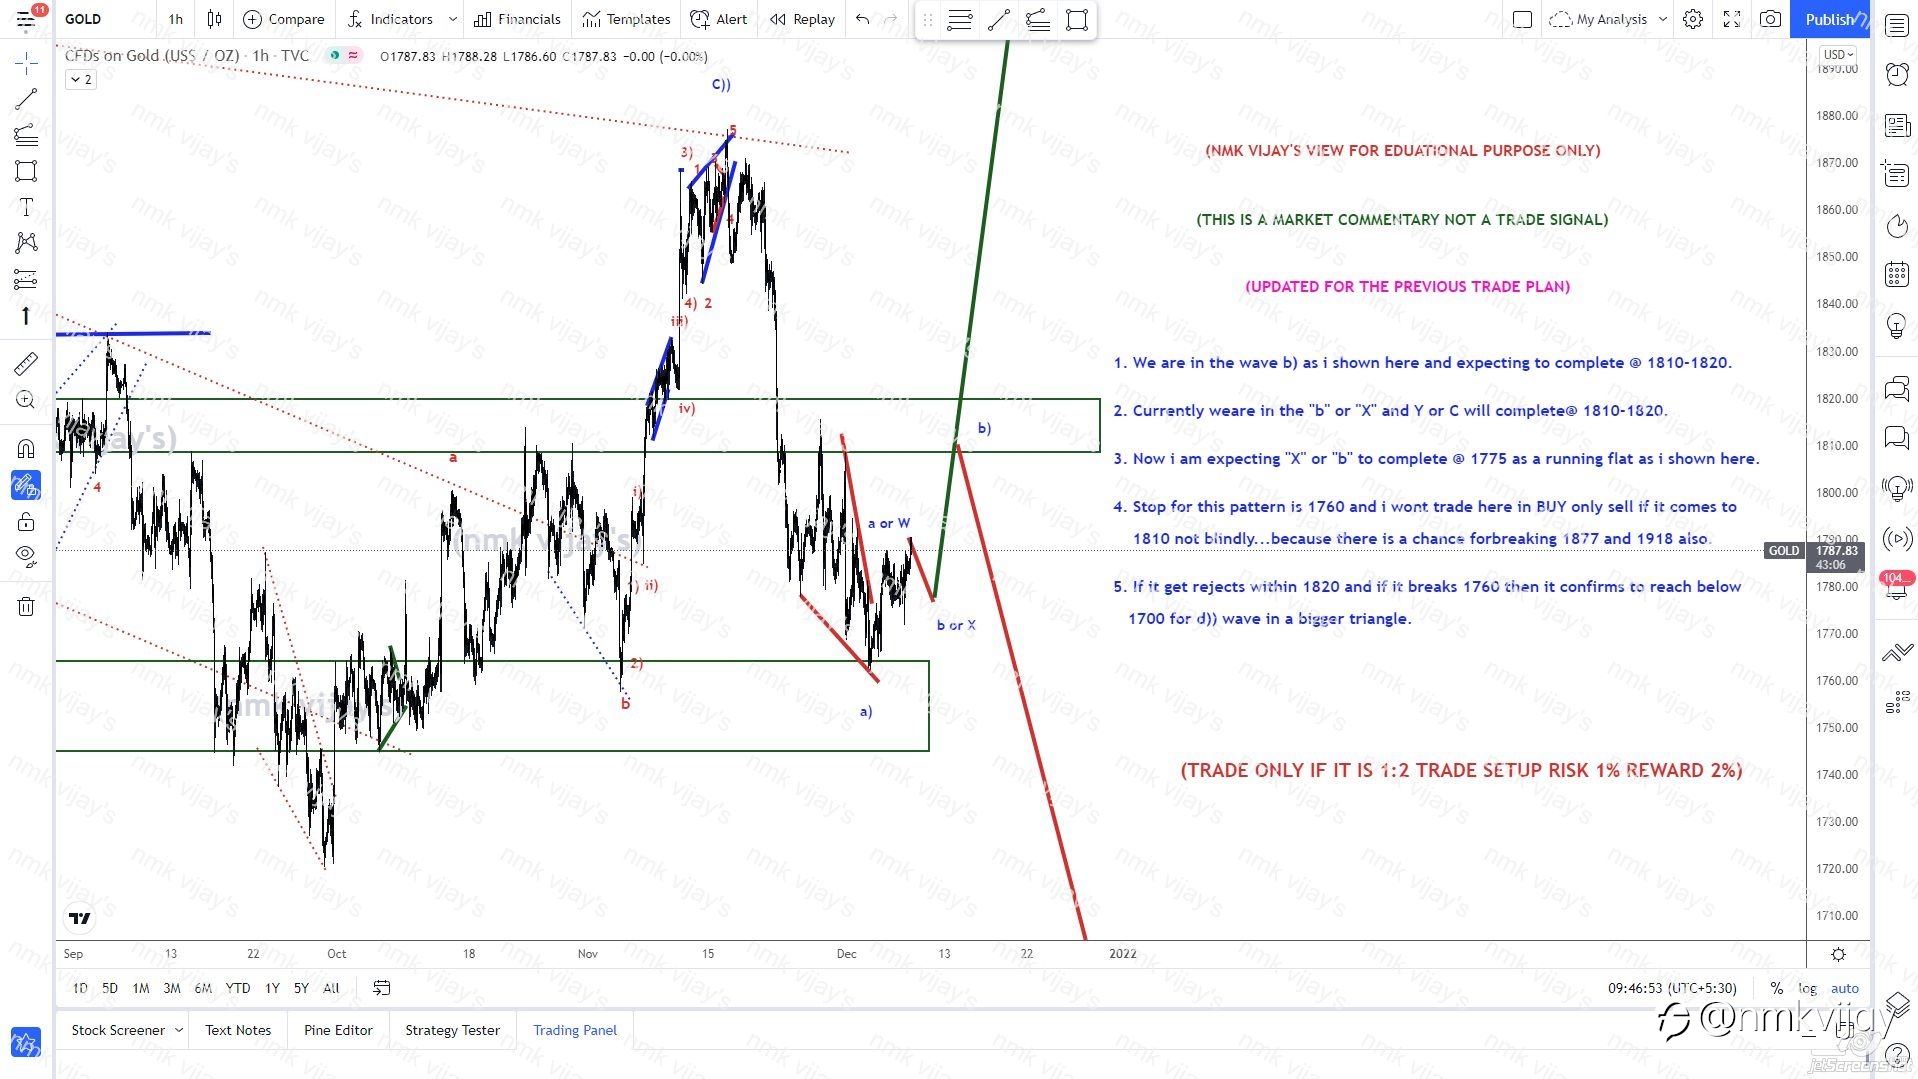 GOLD- 1 Hr chart updated for previous view 1810 to SHORT ?